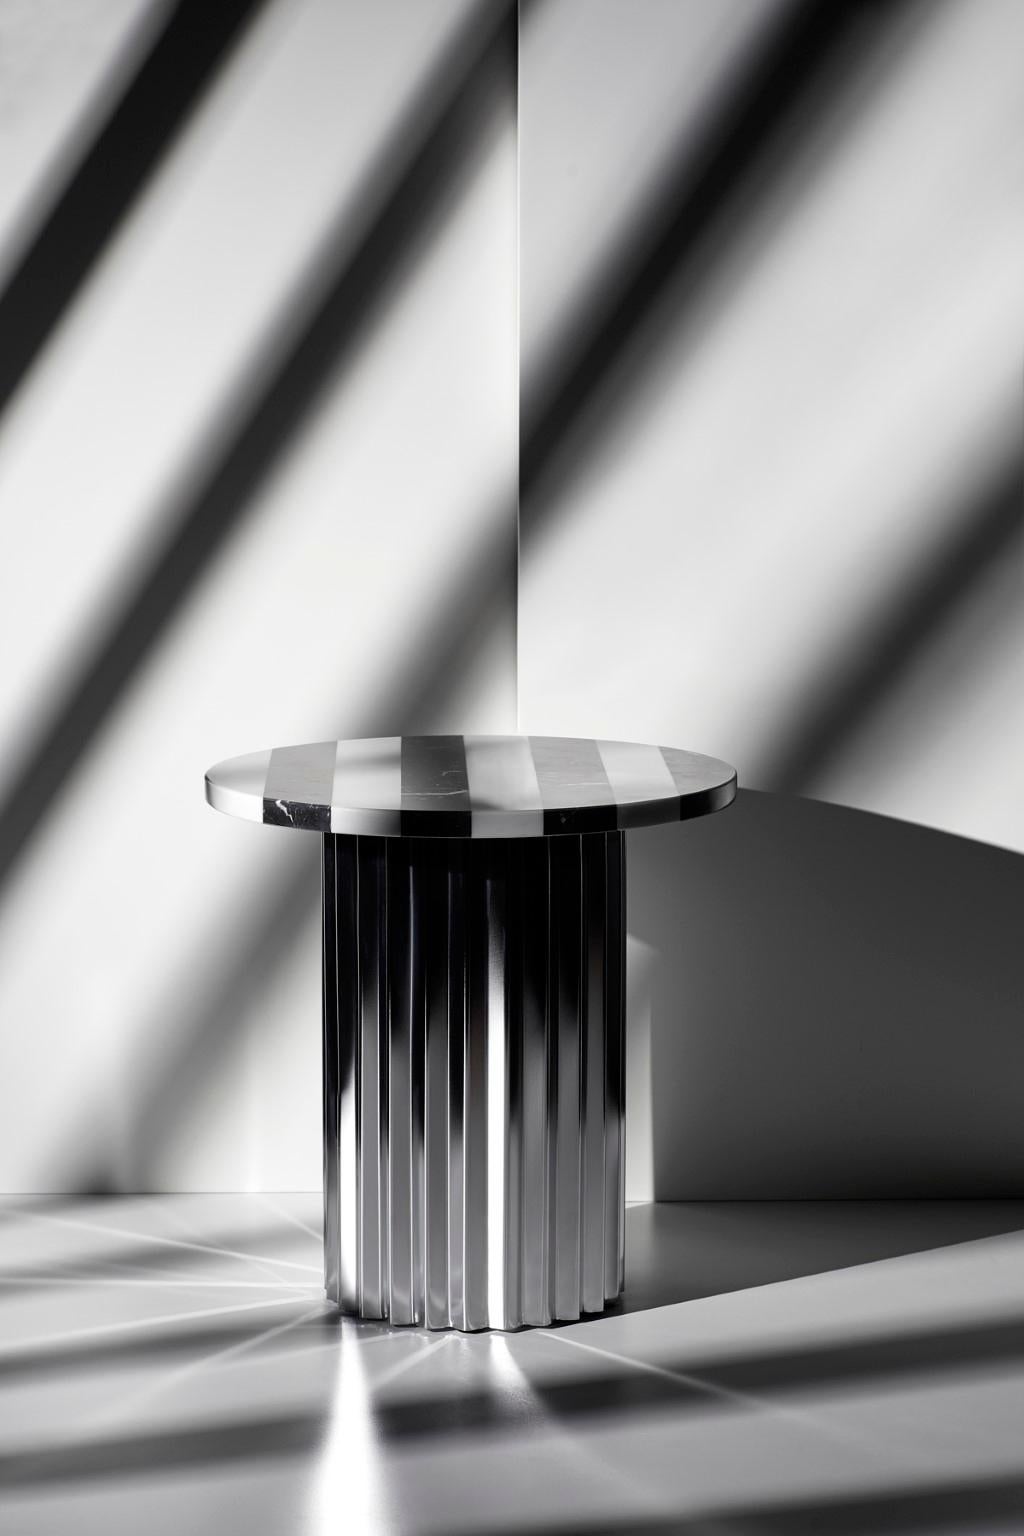 Column lounge table with marble 40 by Lisette Rützou
Dimensions: D 40 x H 41 cm
Materials: Marble
Also available in Ø 60

2Lisette Rützou’s design is motivated by an urge to articulate a story. Inspired by the beauty of materials, form and